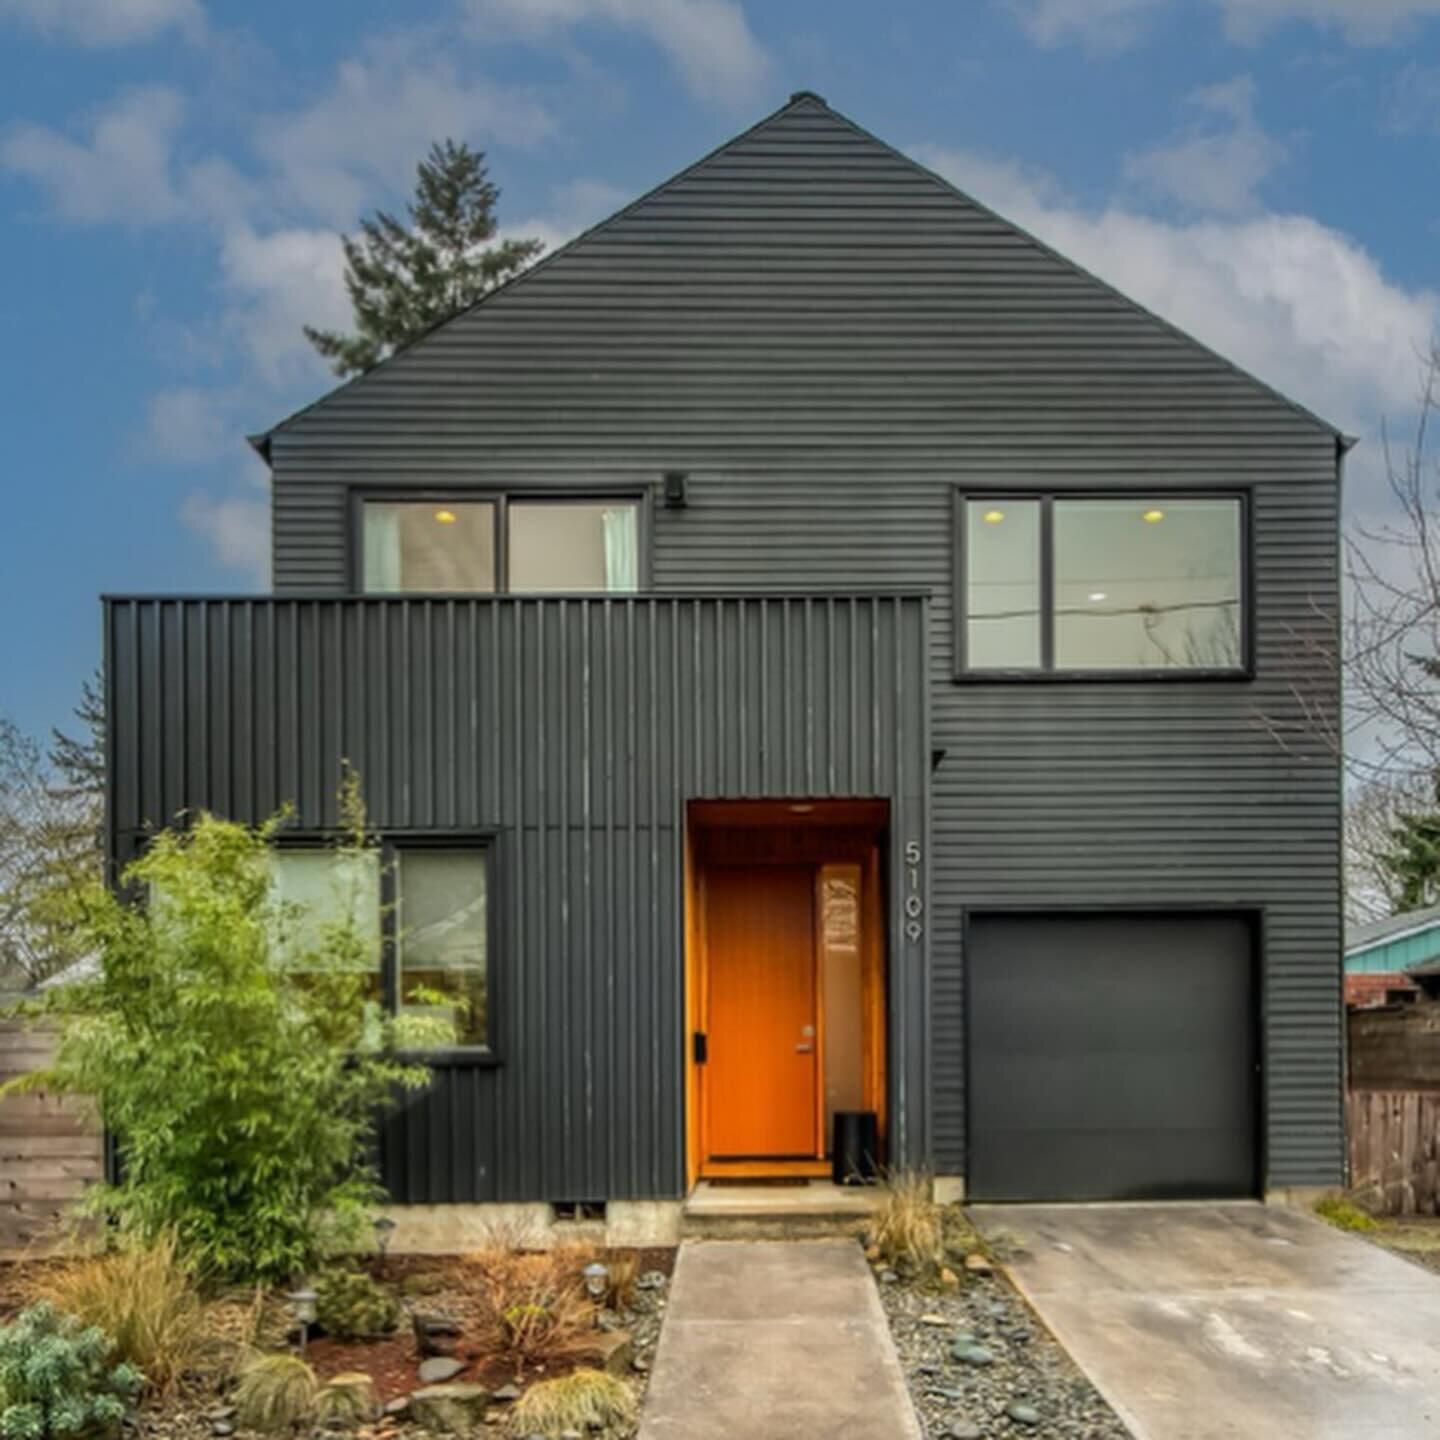 I took a sunny walk after showing this house I&rsquo;d be completely chuffed to call home. It took me less than 10 on foot to reach @st.francisicecream @offthegriddlepdx @breadandrosesmarket @unlimited_ipa @barcarlopdx @kitchenculturepdx and all the 